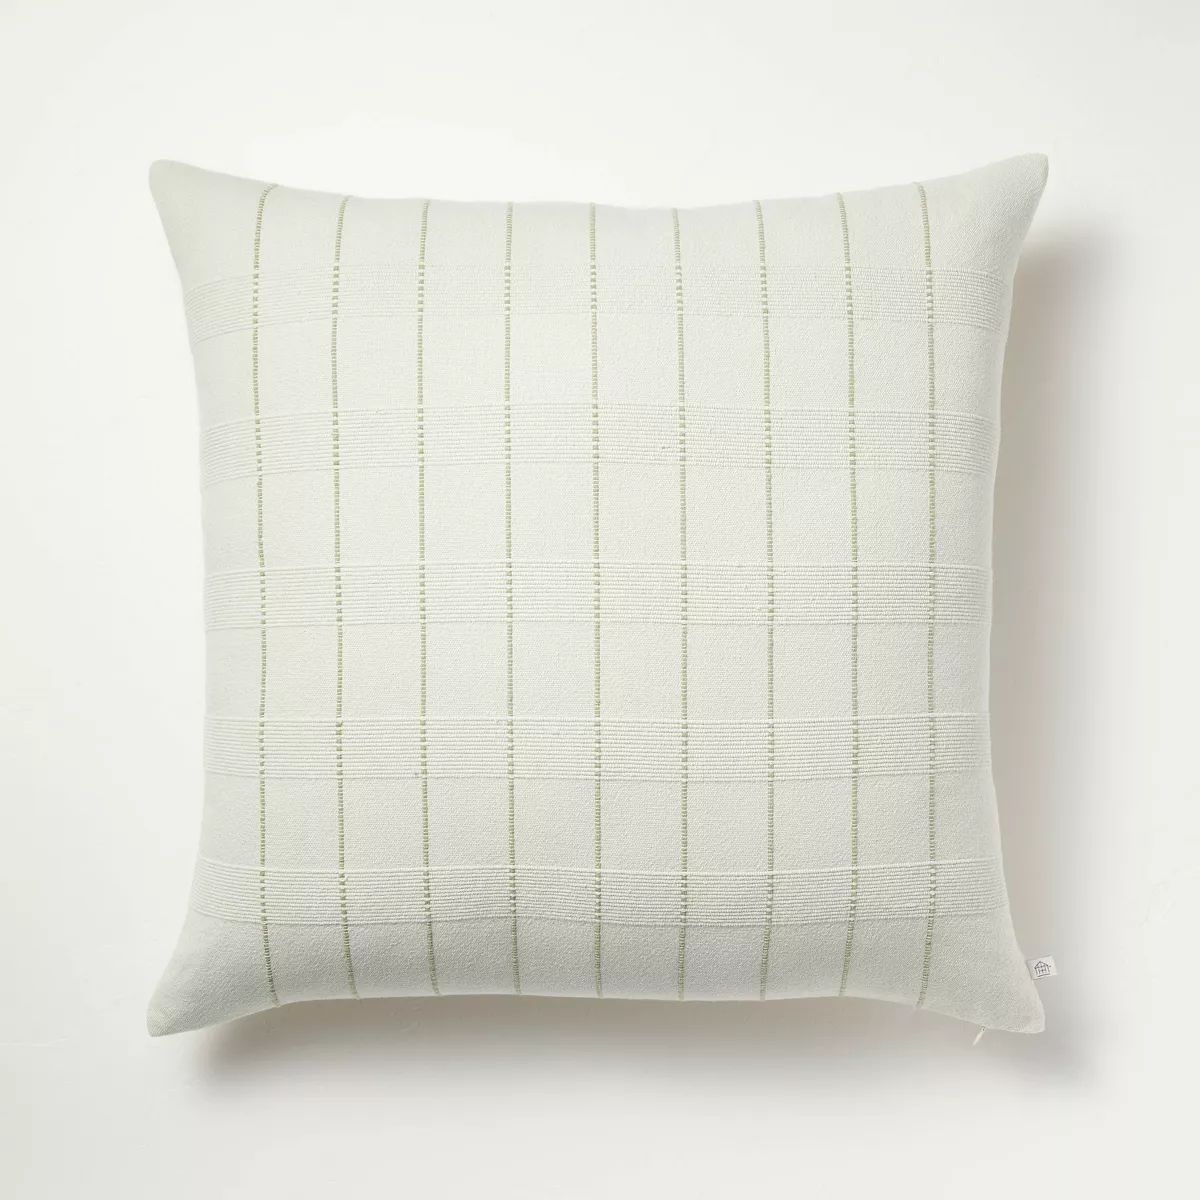 24"x24" Textural Multistripe Square Throw Pillow Light Green - Hearth & Hand™ with Magnolia | Target